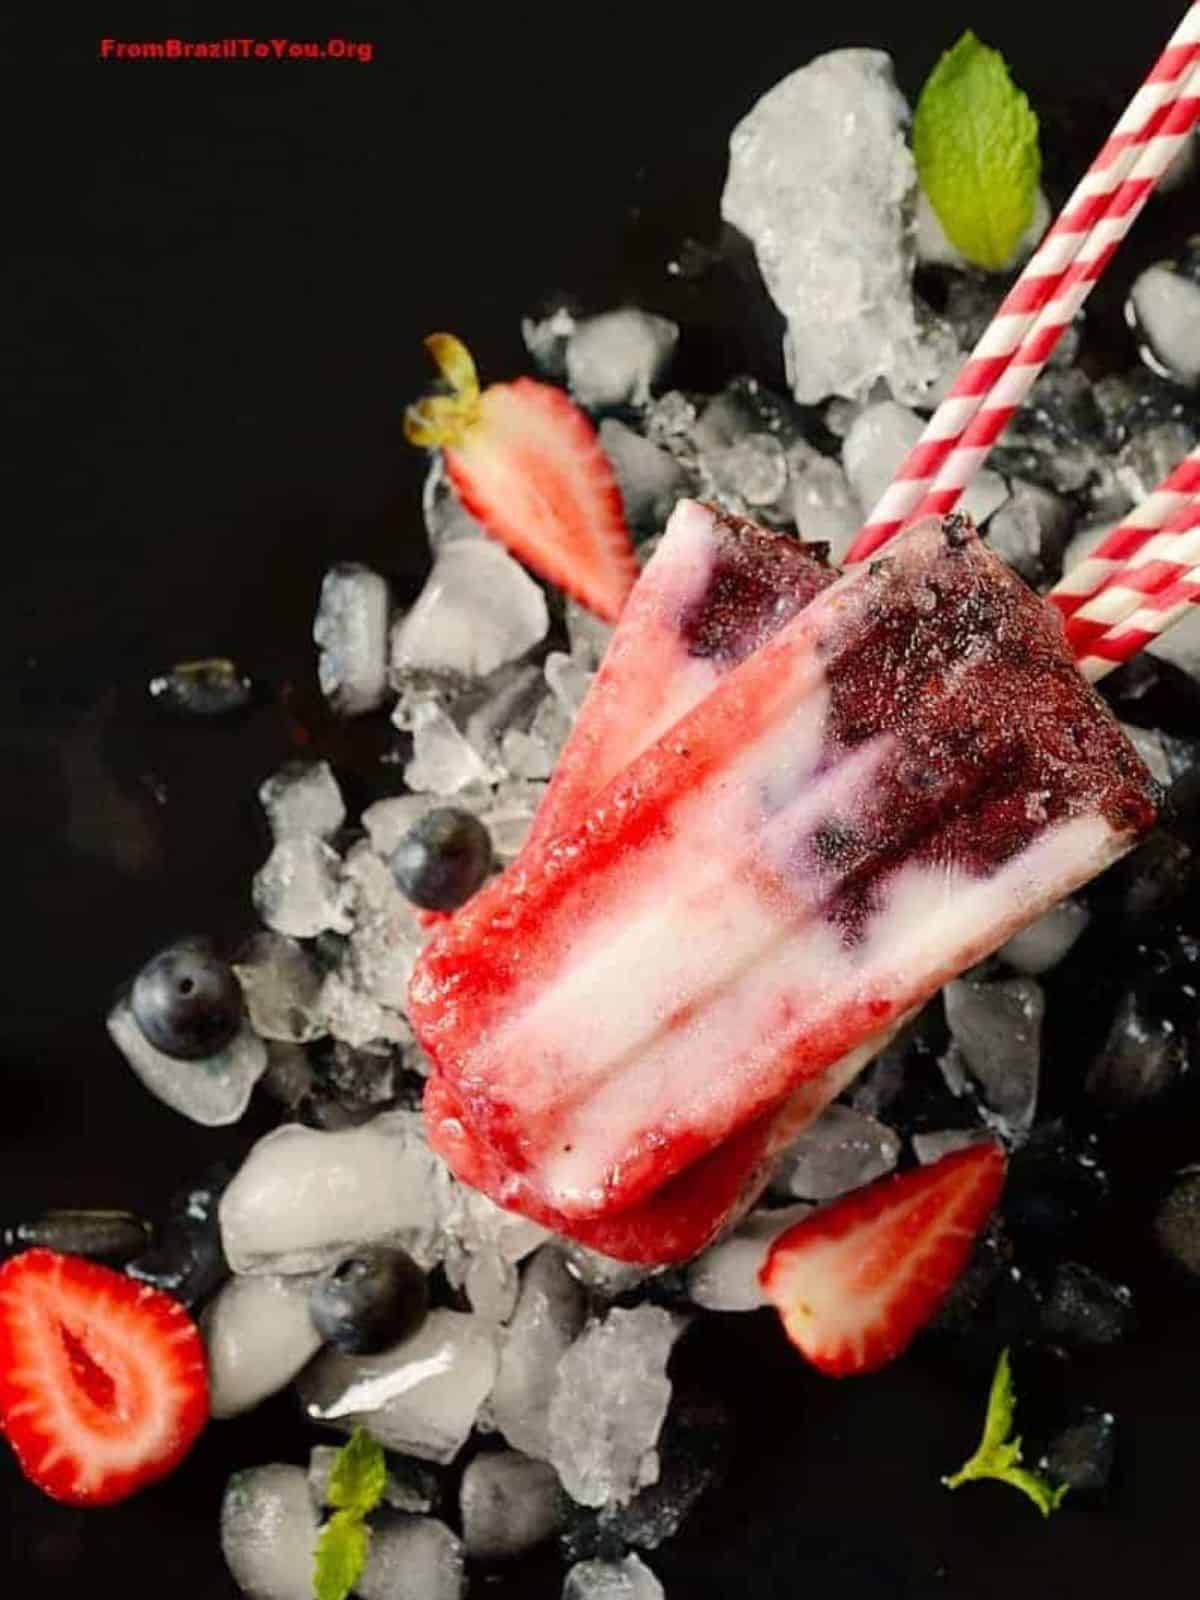 refreshing berry popsicles made with coconut and creamy yogurt.